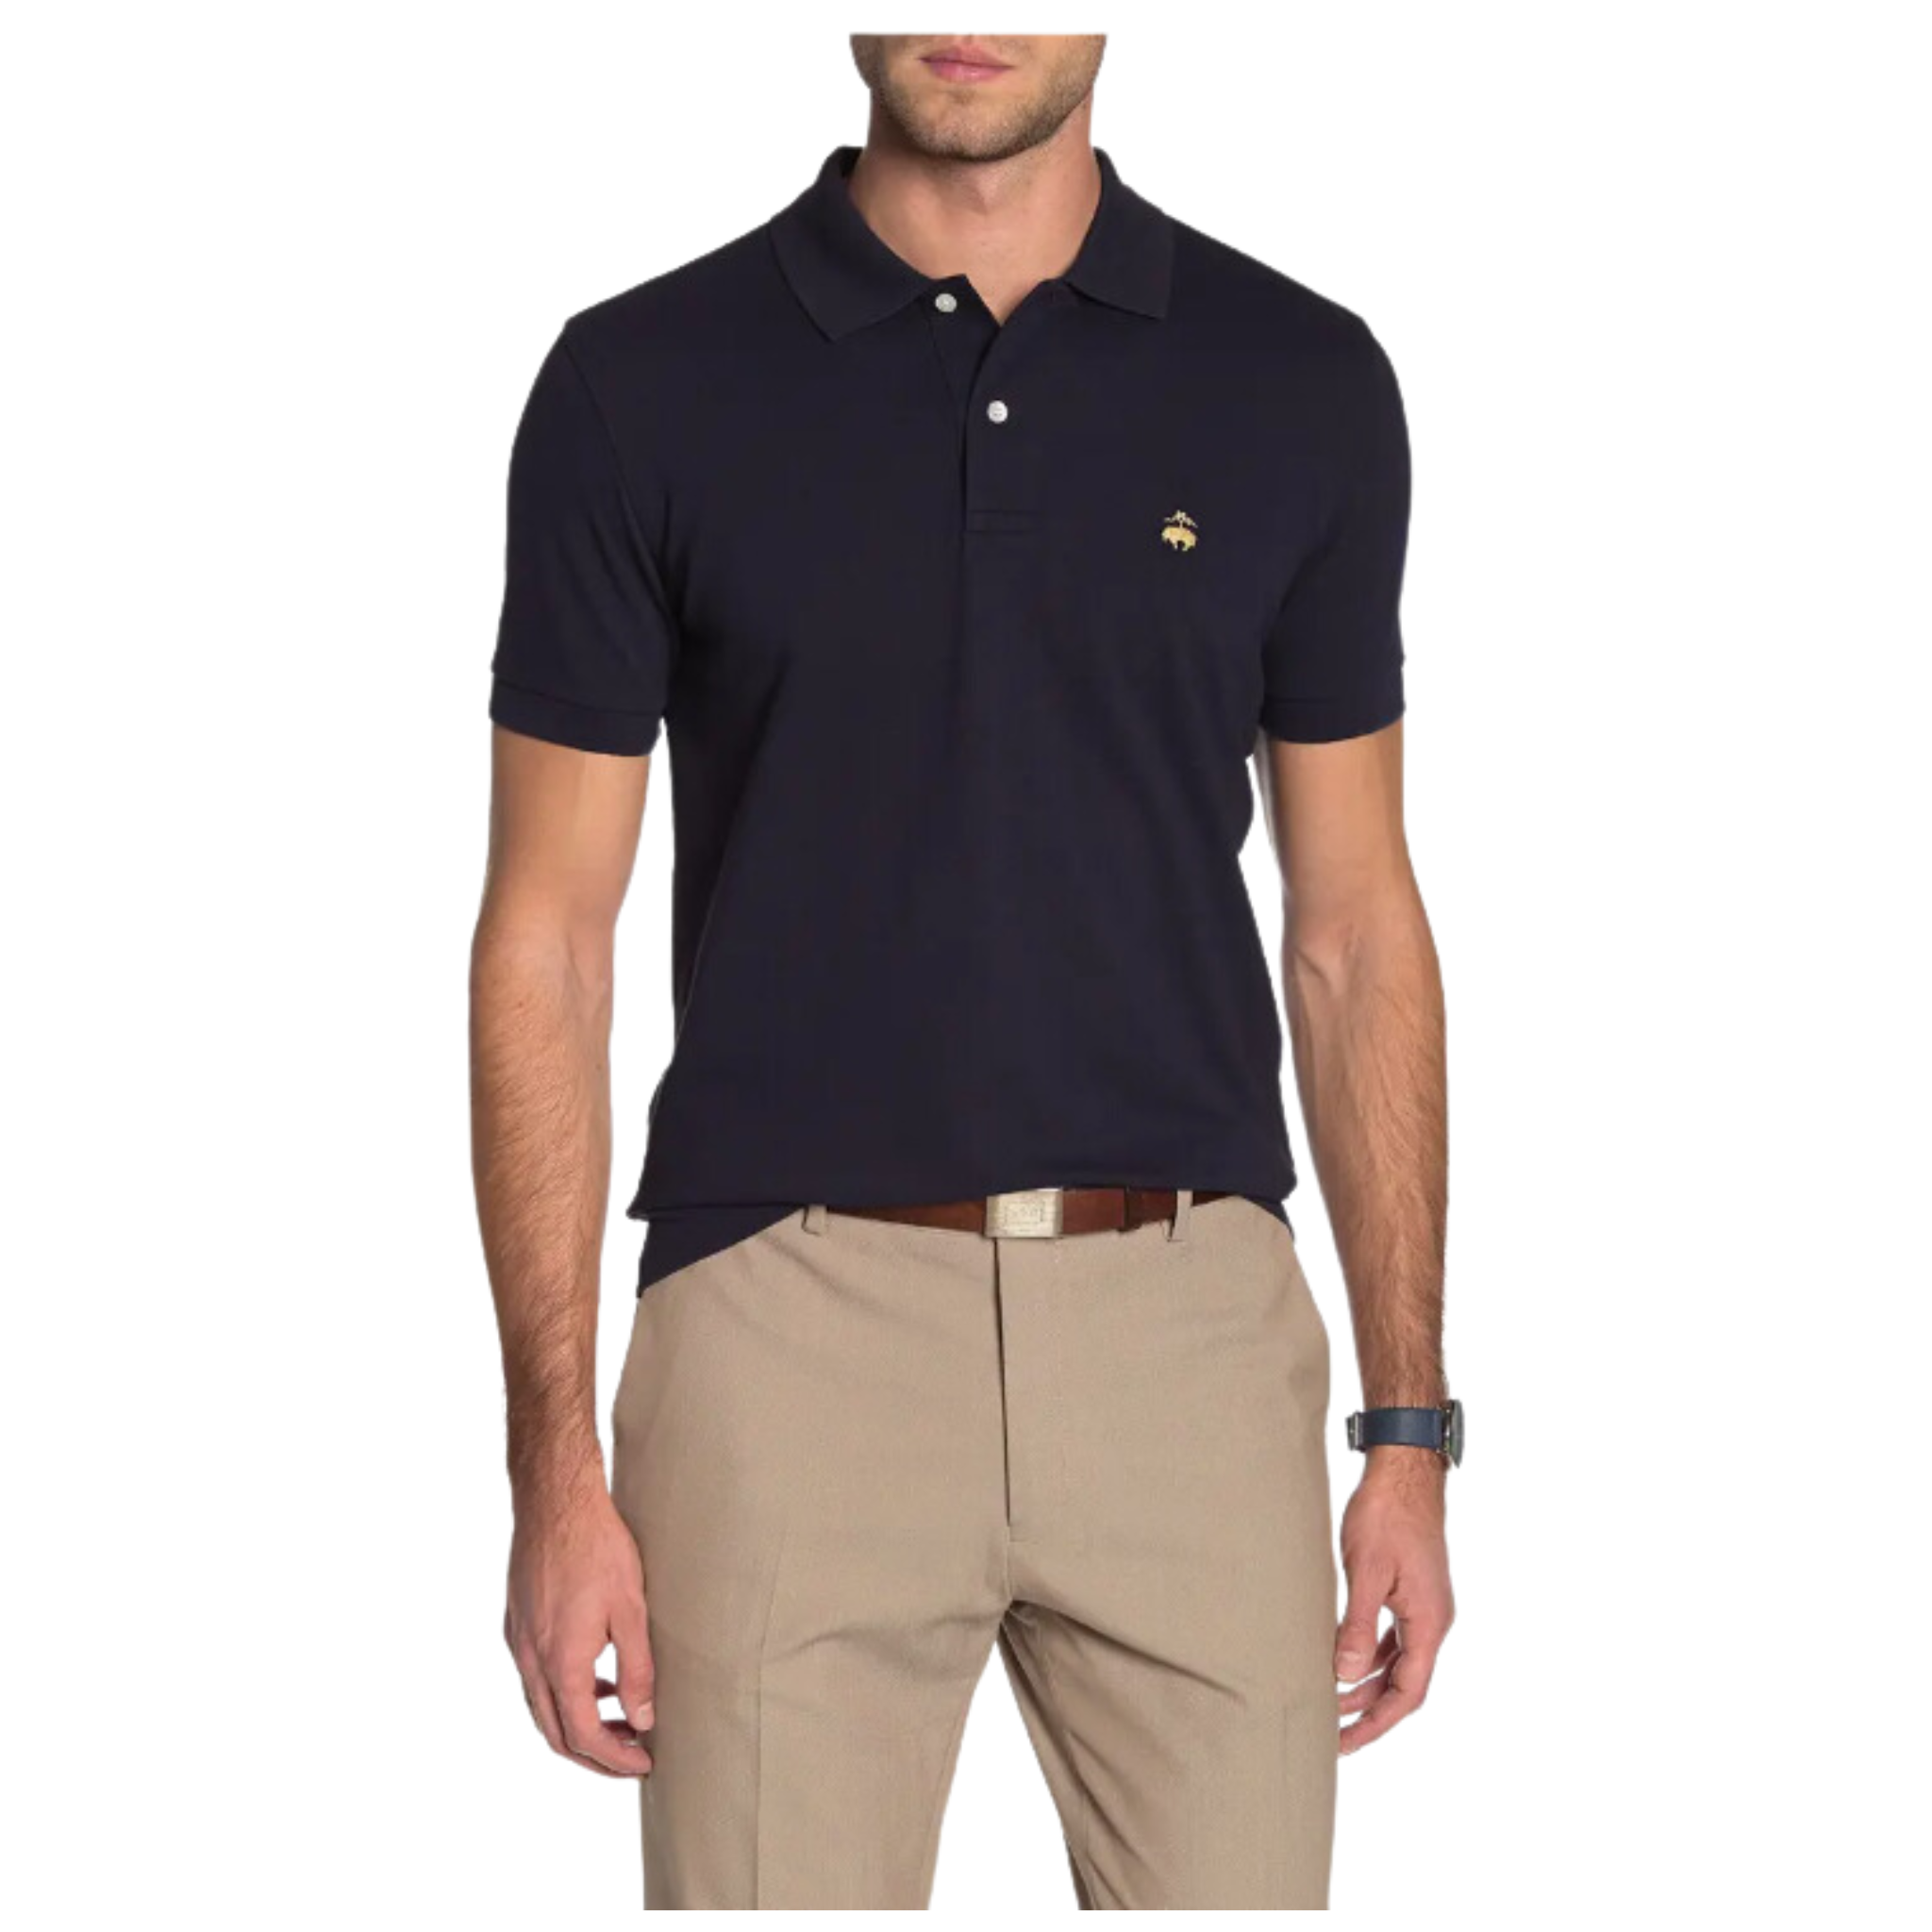 Brooks Brothers Solid Piquè Slim Fit Polos On Sale